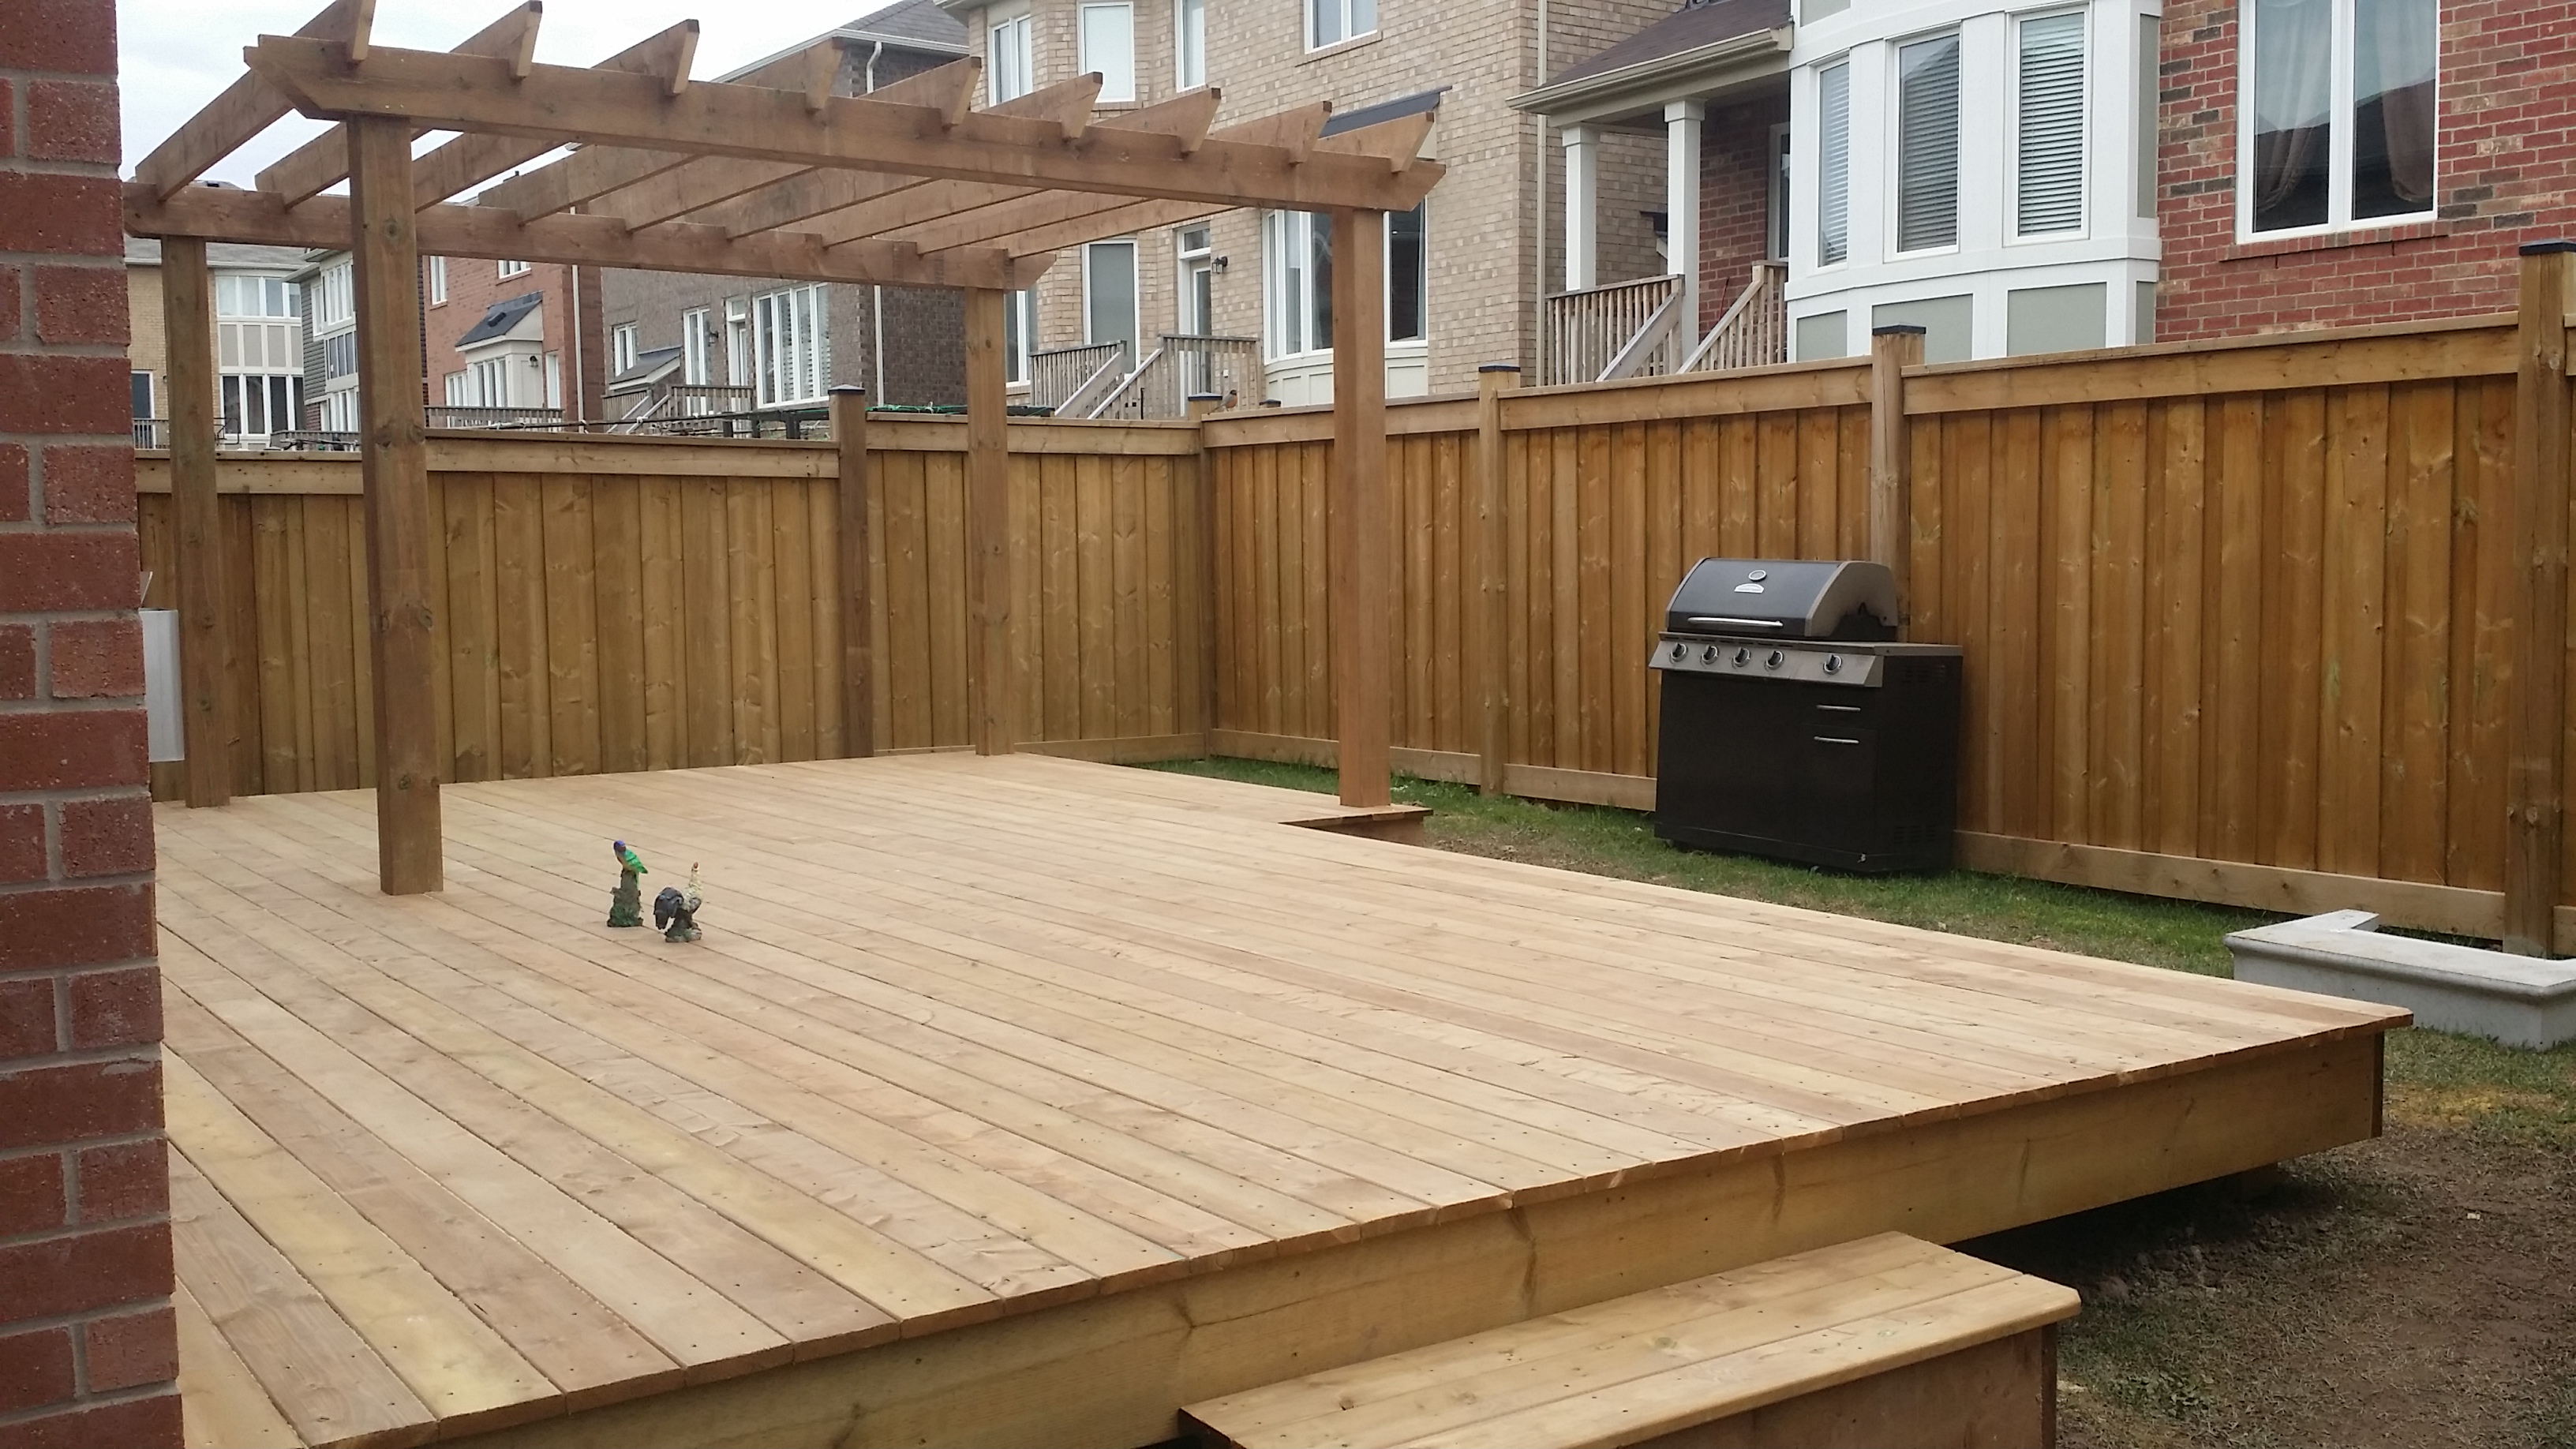 At Keinzen we build high quality patios at an affordable price. Call us now at 416 429 4682 for a free estimate.